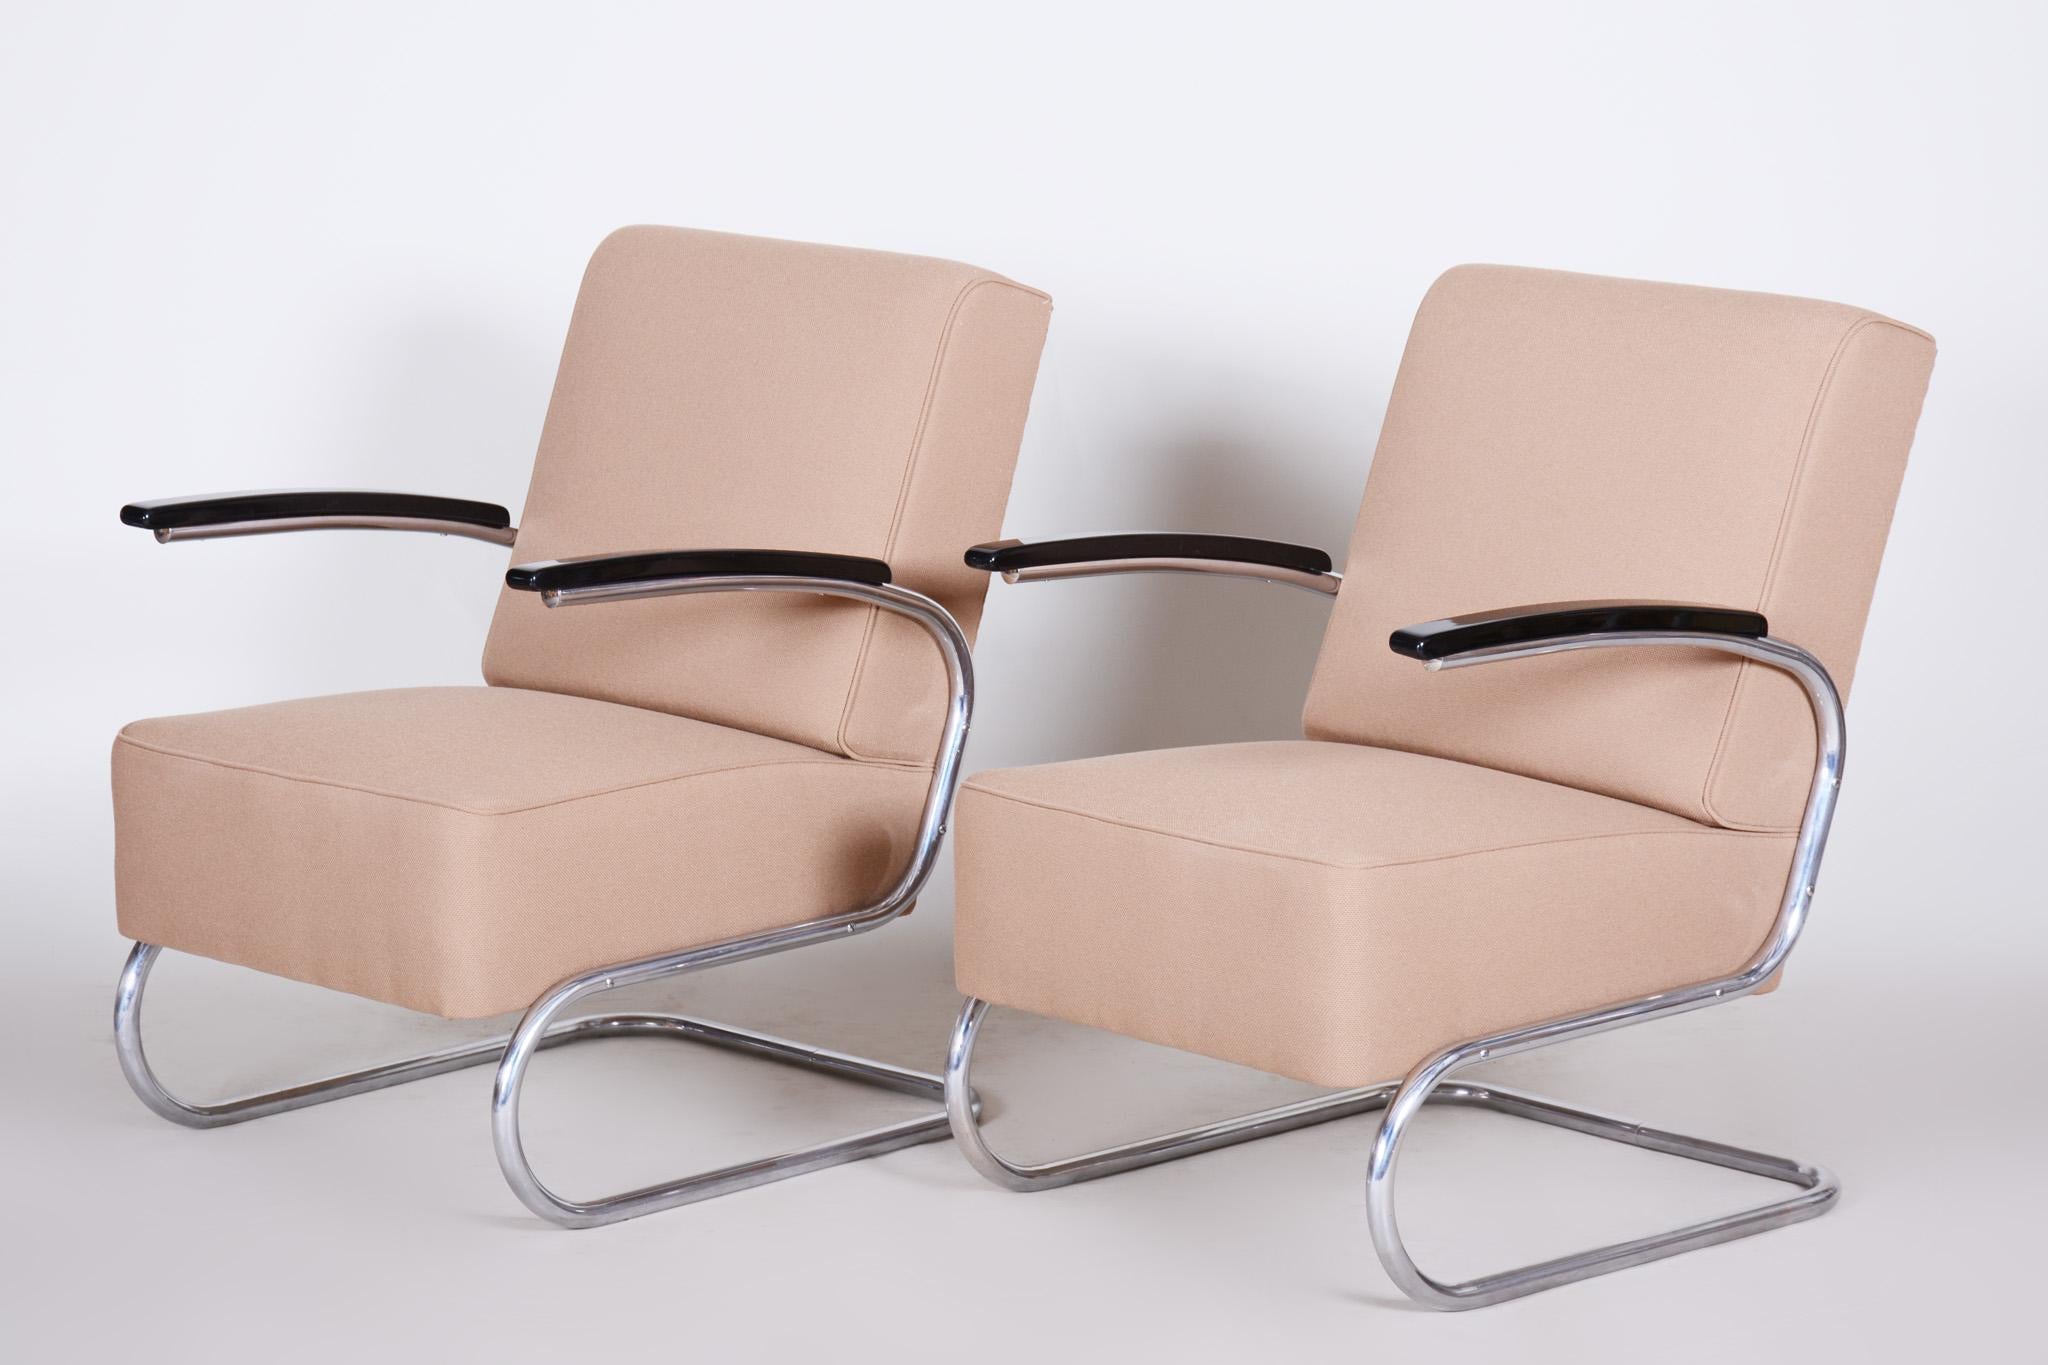 Chrome Bauhaus Armchairs Designed by Mücke Melder, Fully Refurbished, 1930s For Sale 3